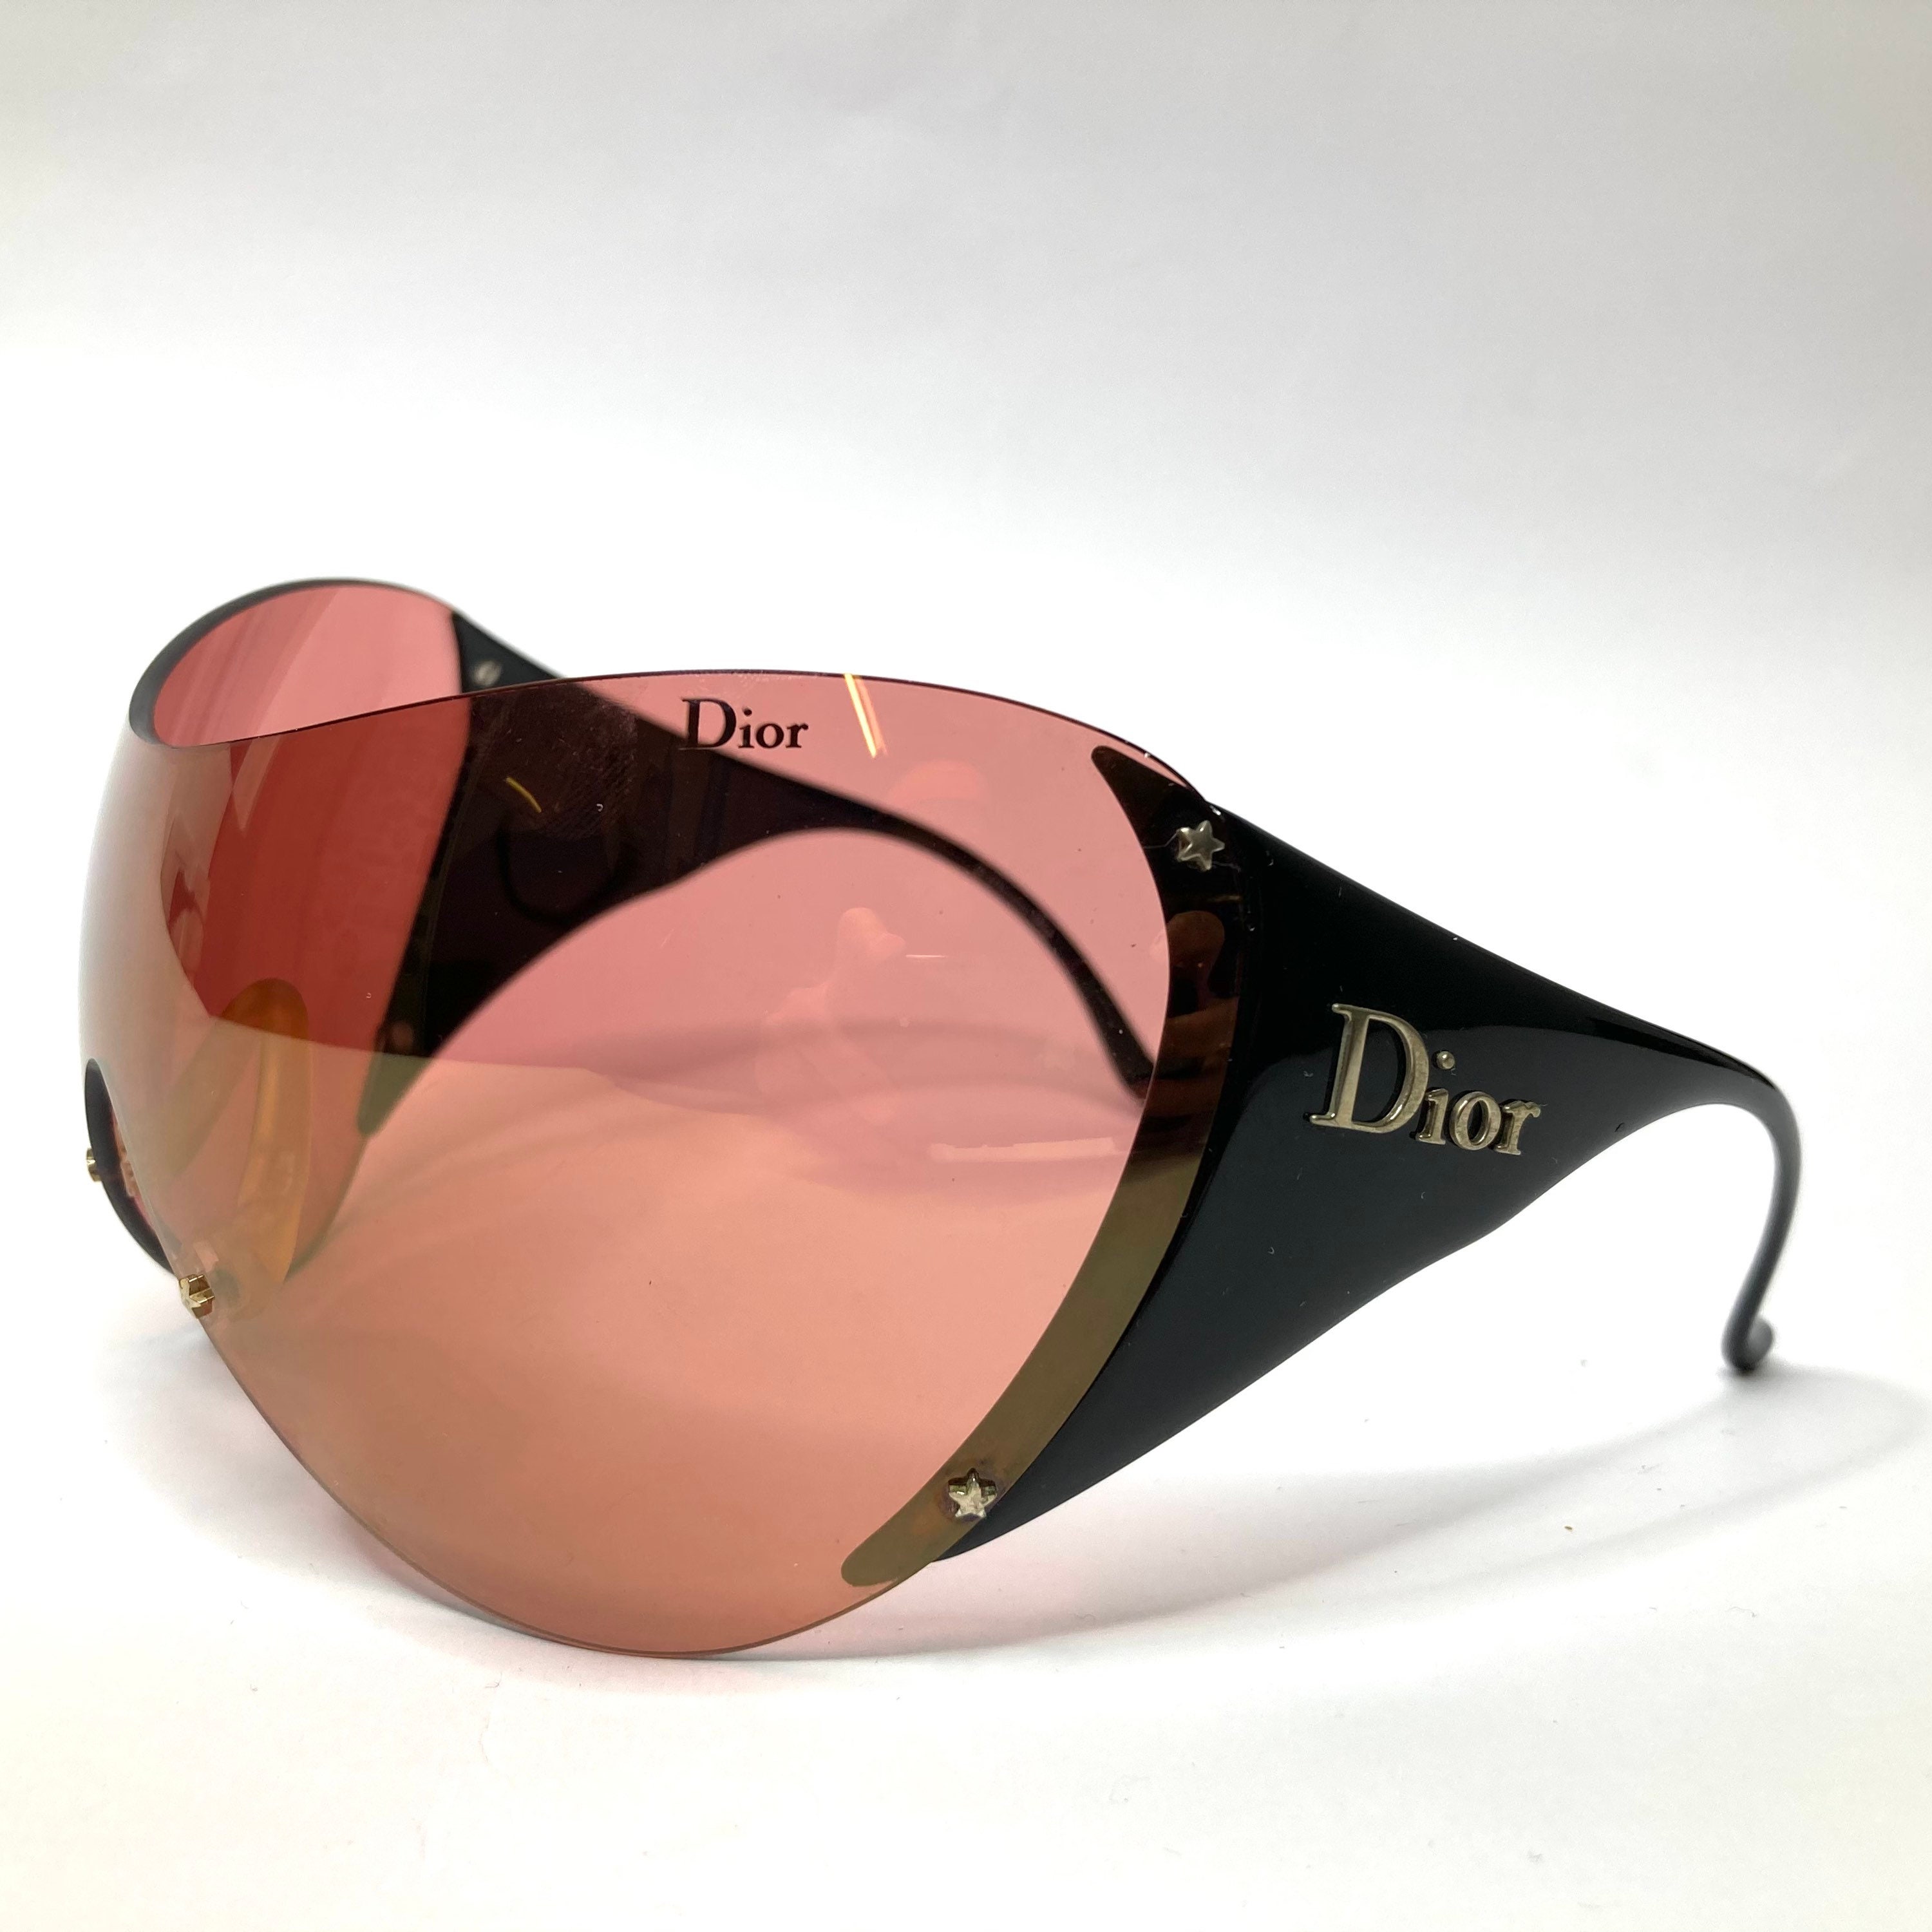 CHRISTIAN DIOR PICCADILLY 2/S SUNGLASSES at AtoZEyewear.com